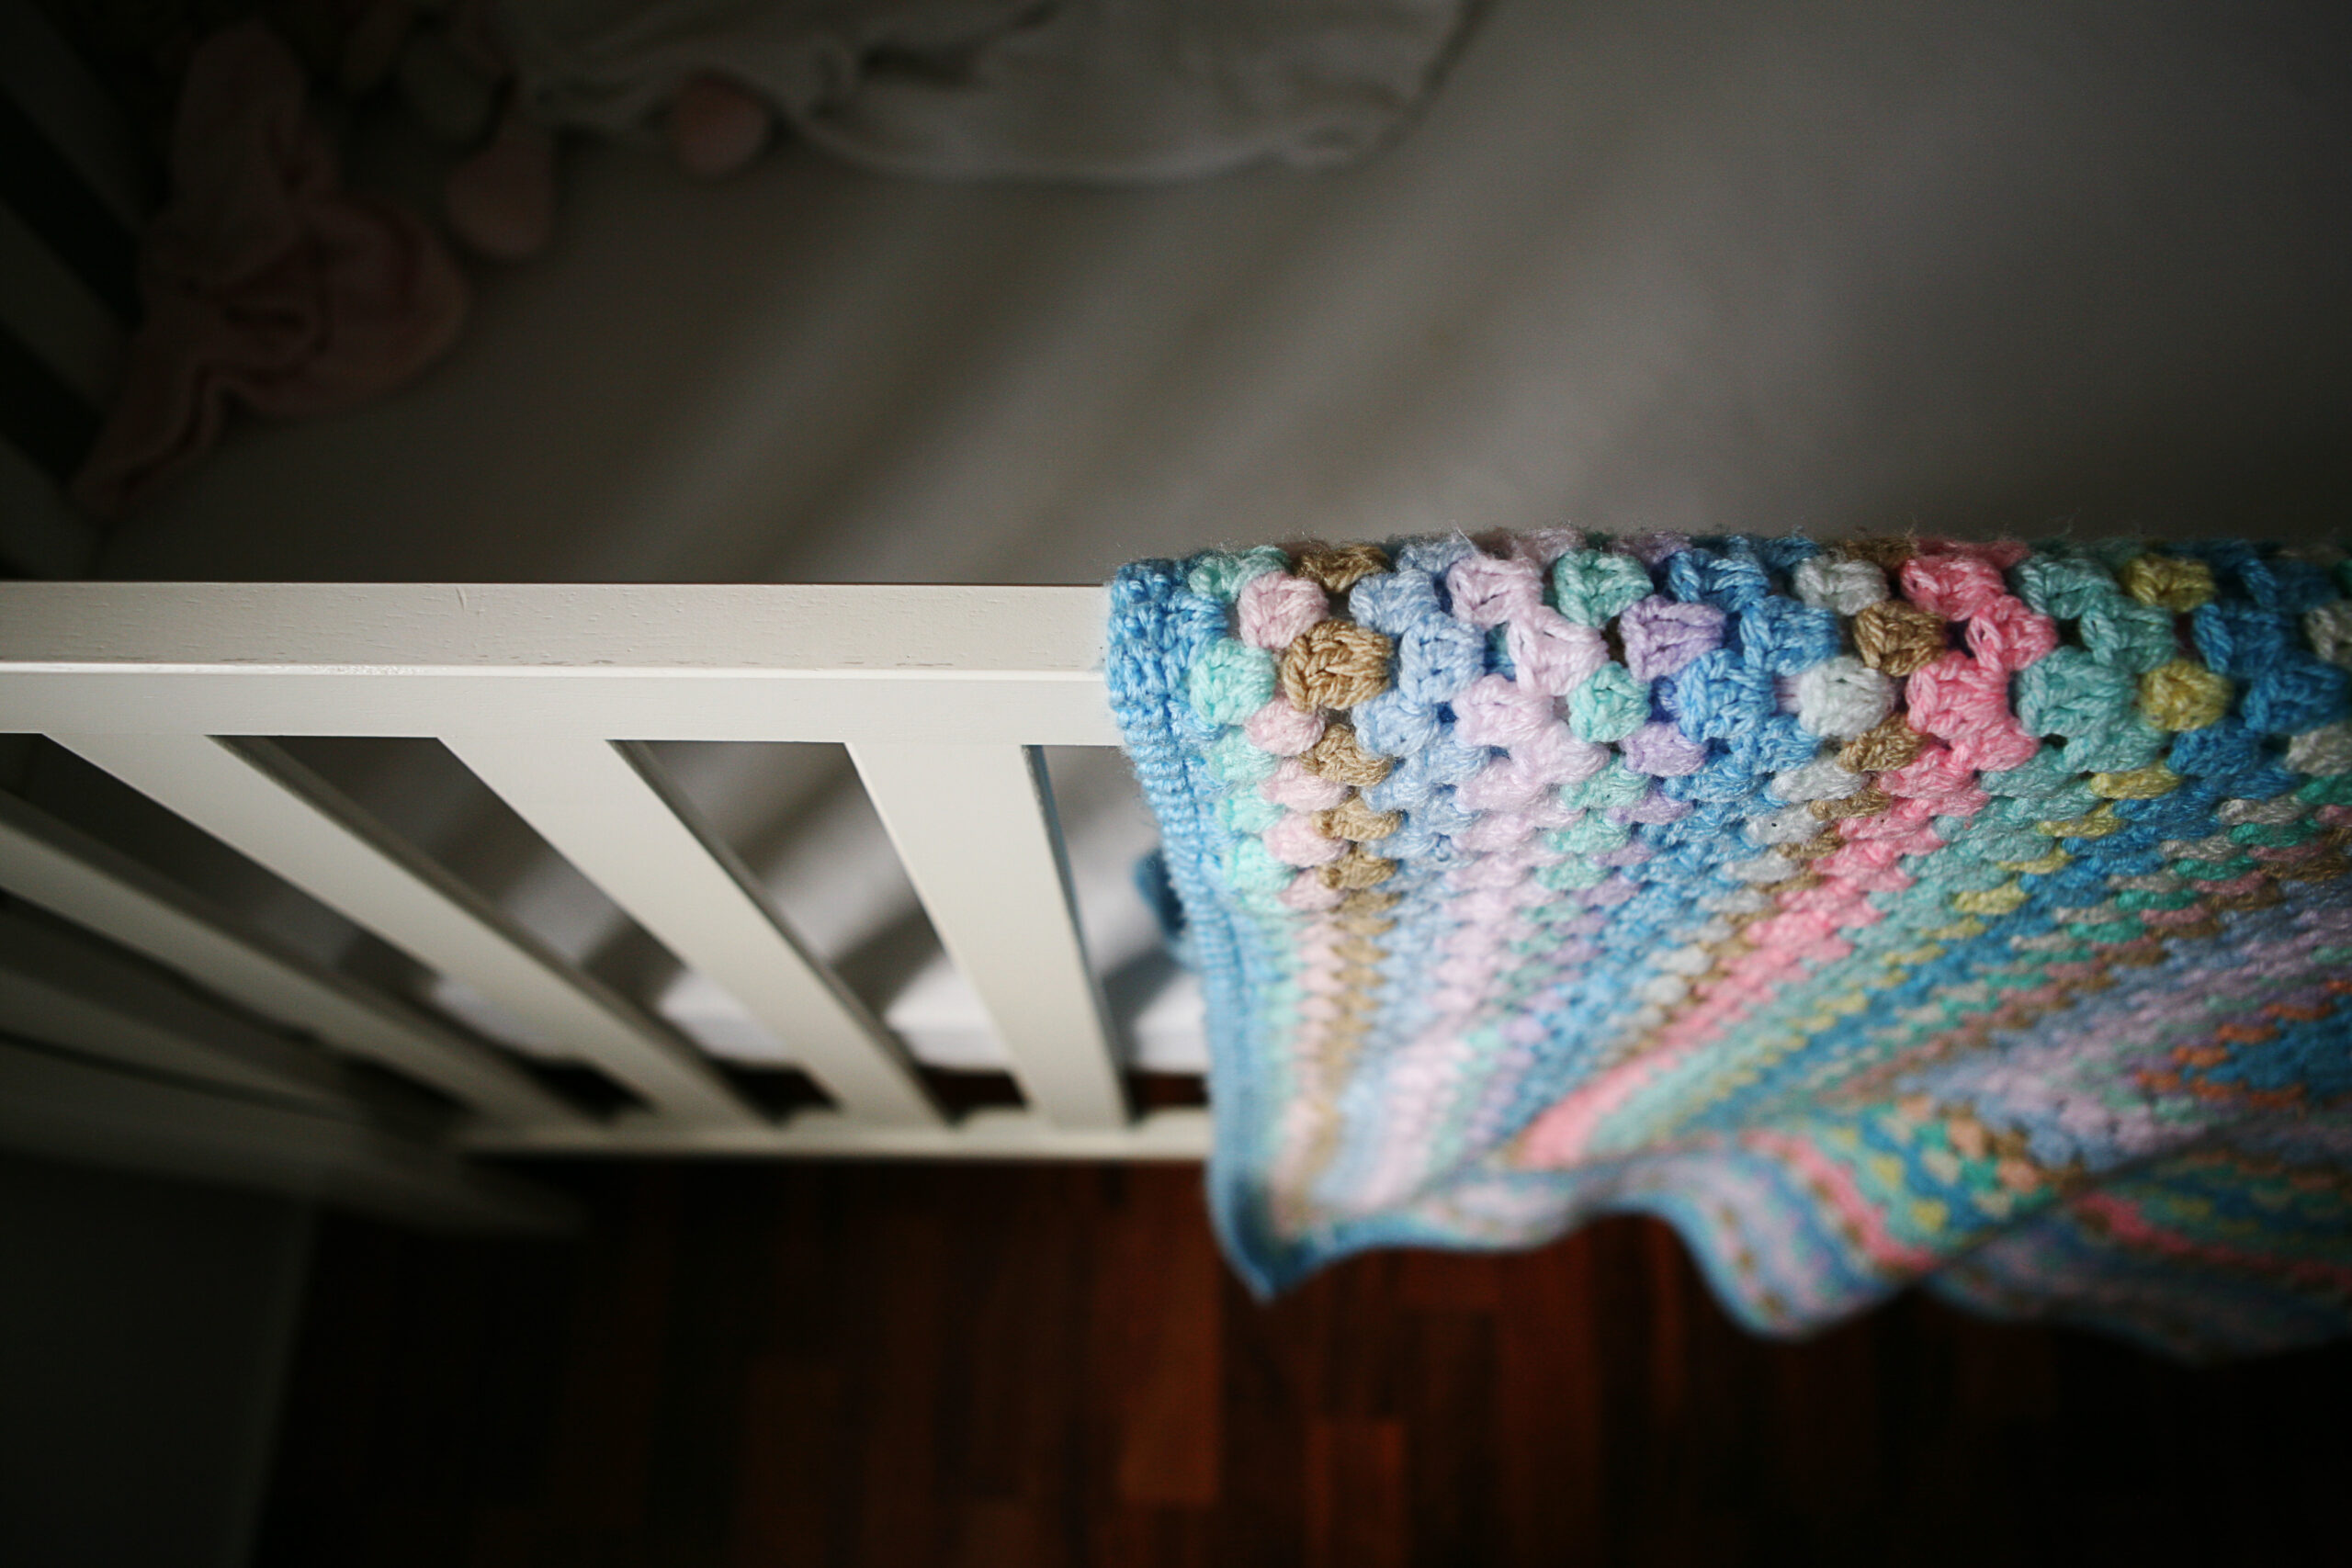 Grieving mother warns parents about using blankets in their baby’s cot